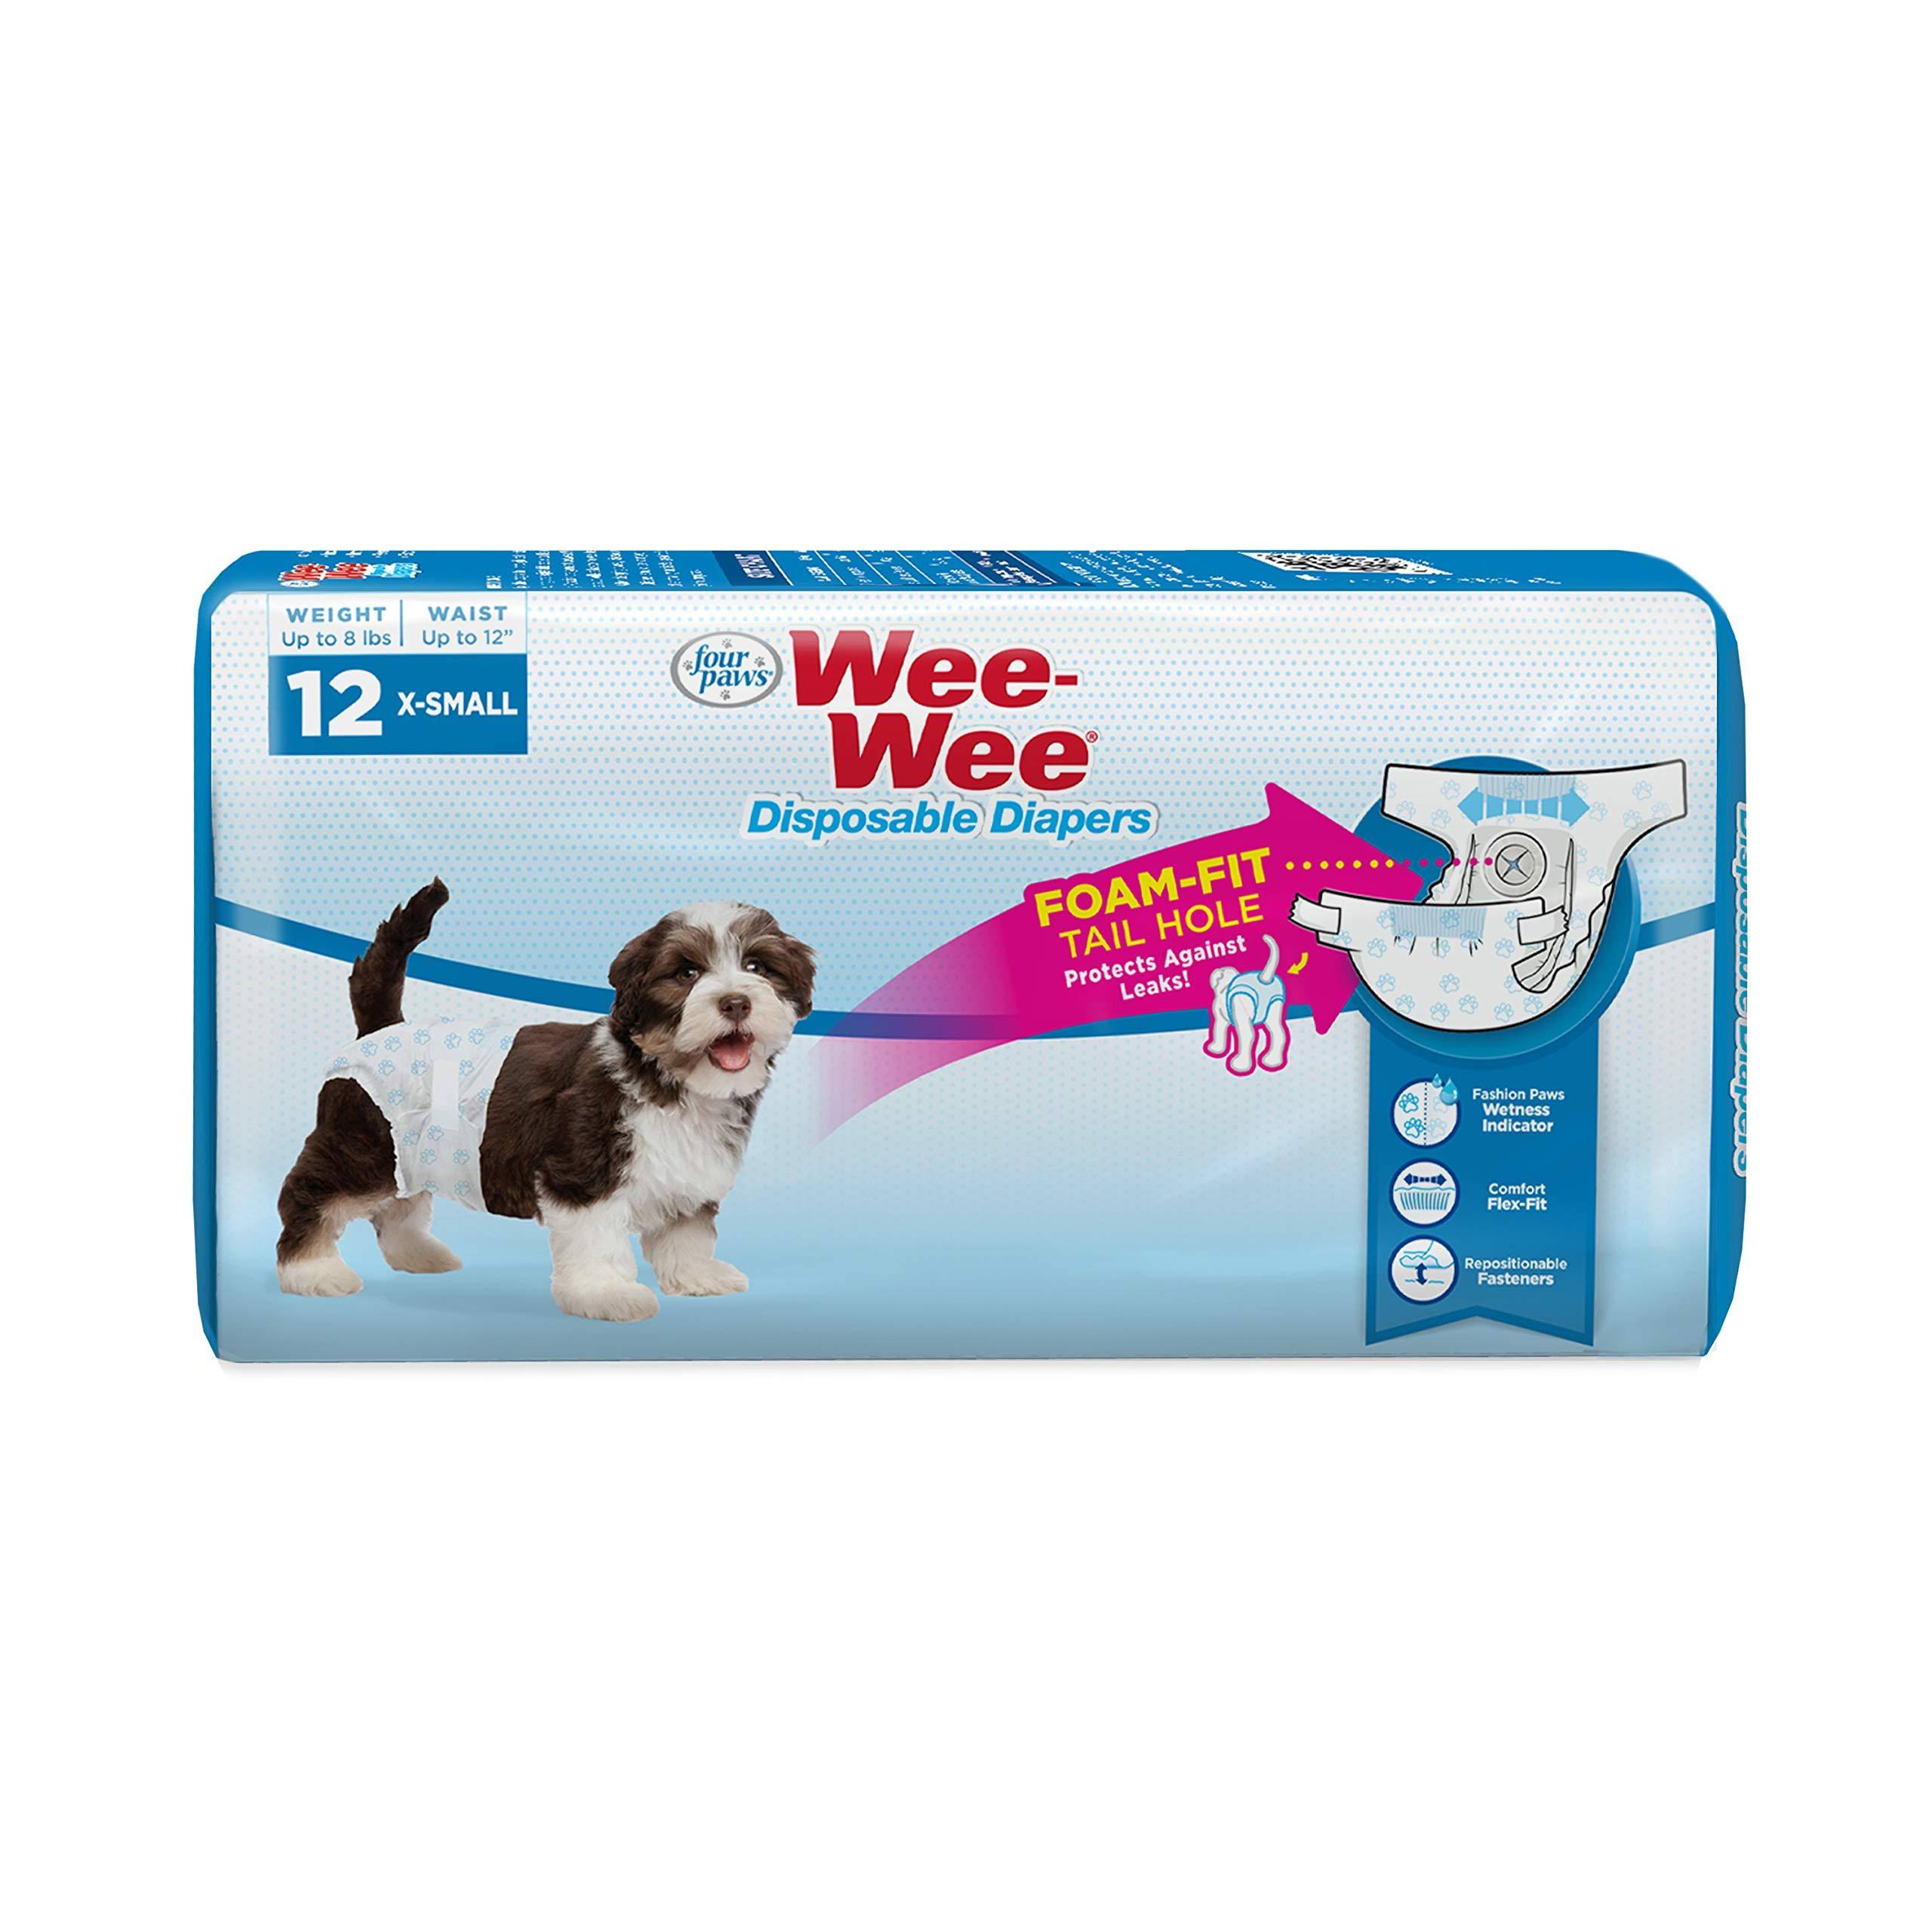 Four Paws Wee-wee Dog Diapers - X-Small, 12pk